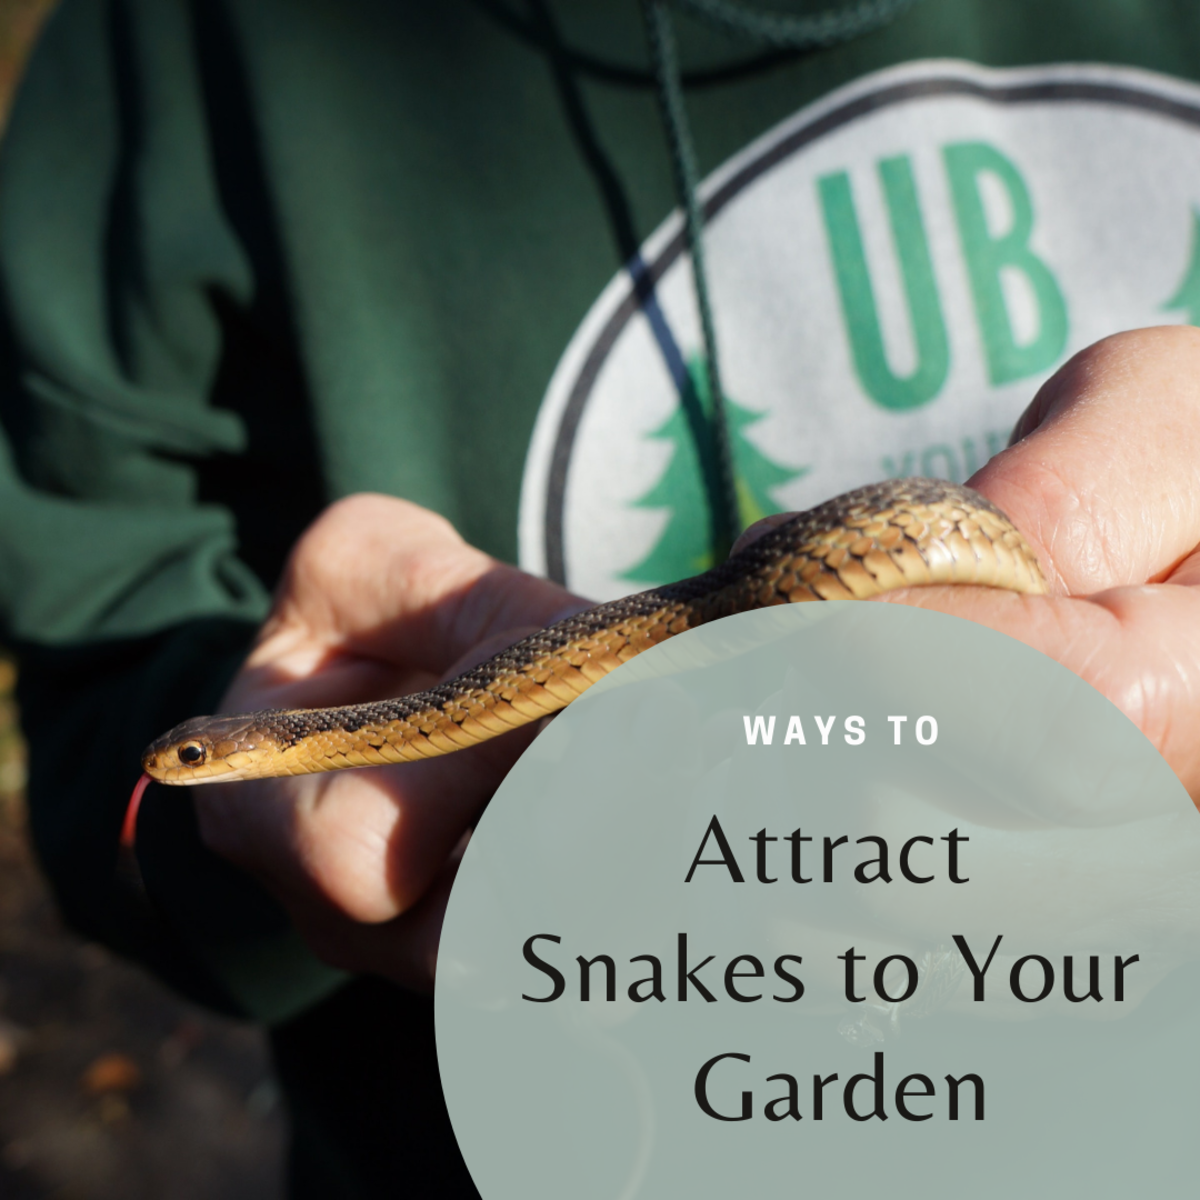 How to Attract Snakes to Your Garden